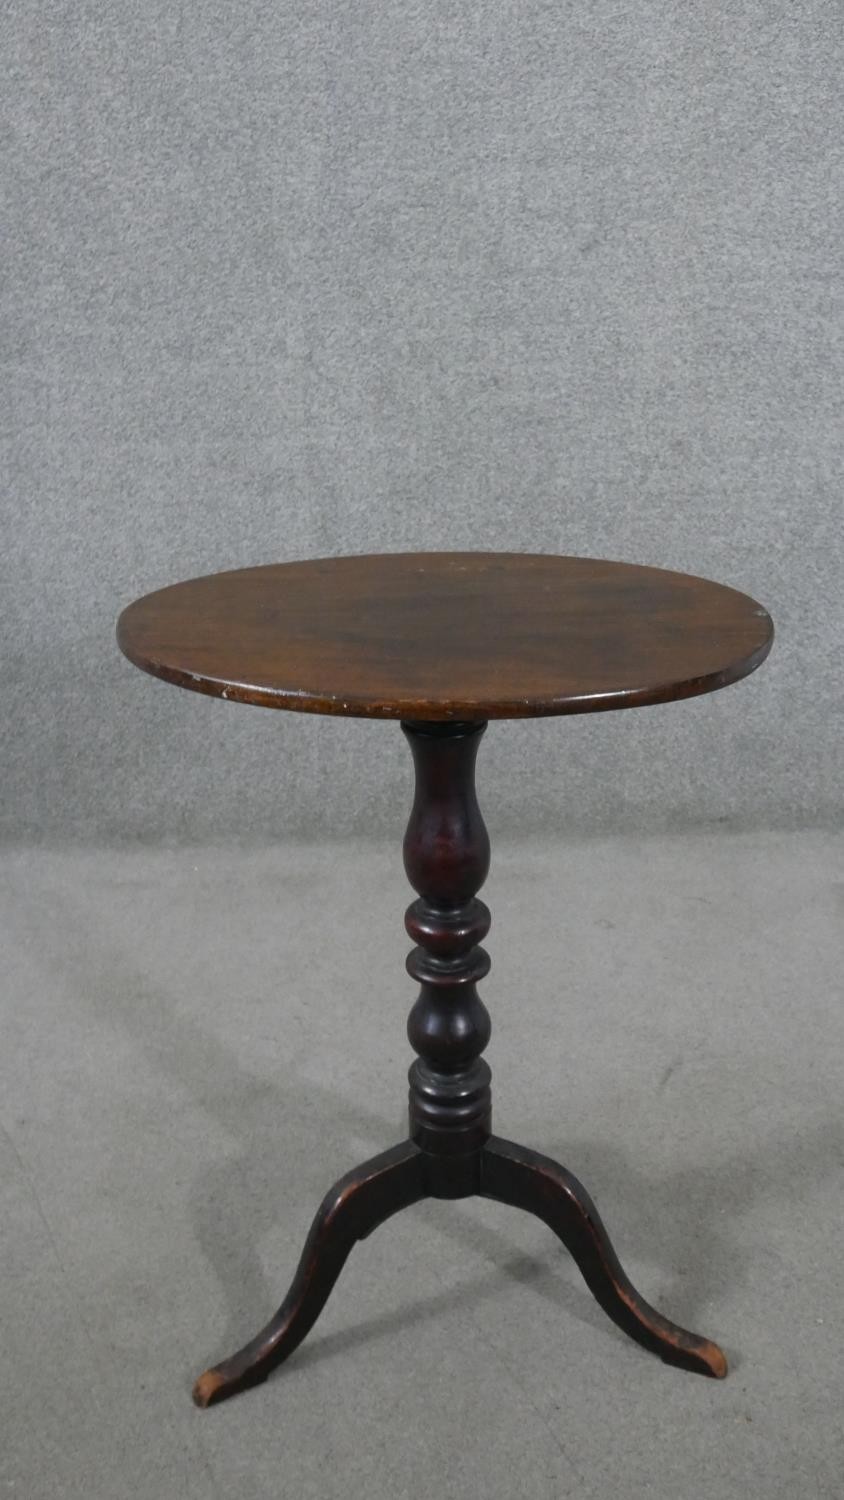 A 19th century mahogany tripod table, with a circular top on a turned stem and tripod supports, - Image 5 of 6